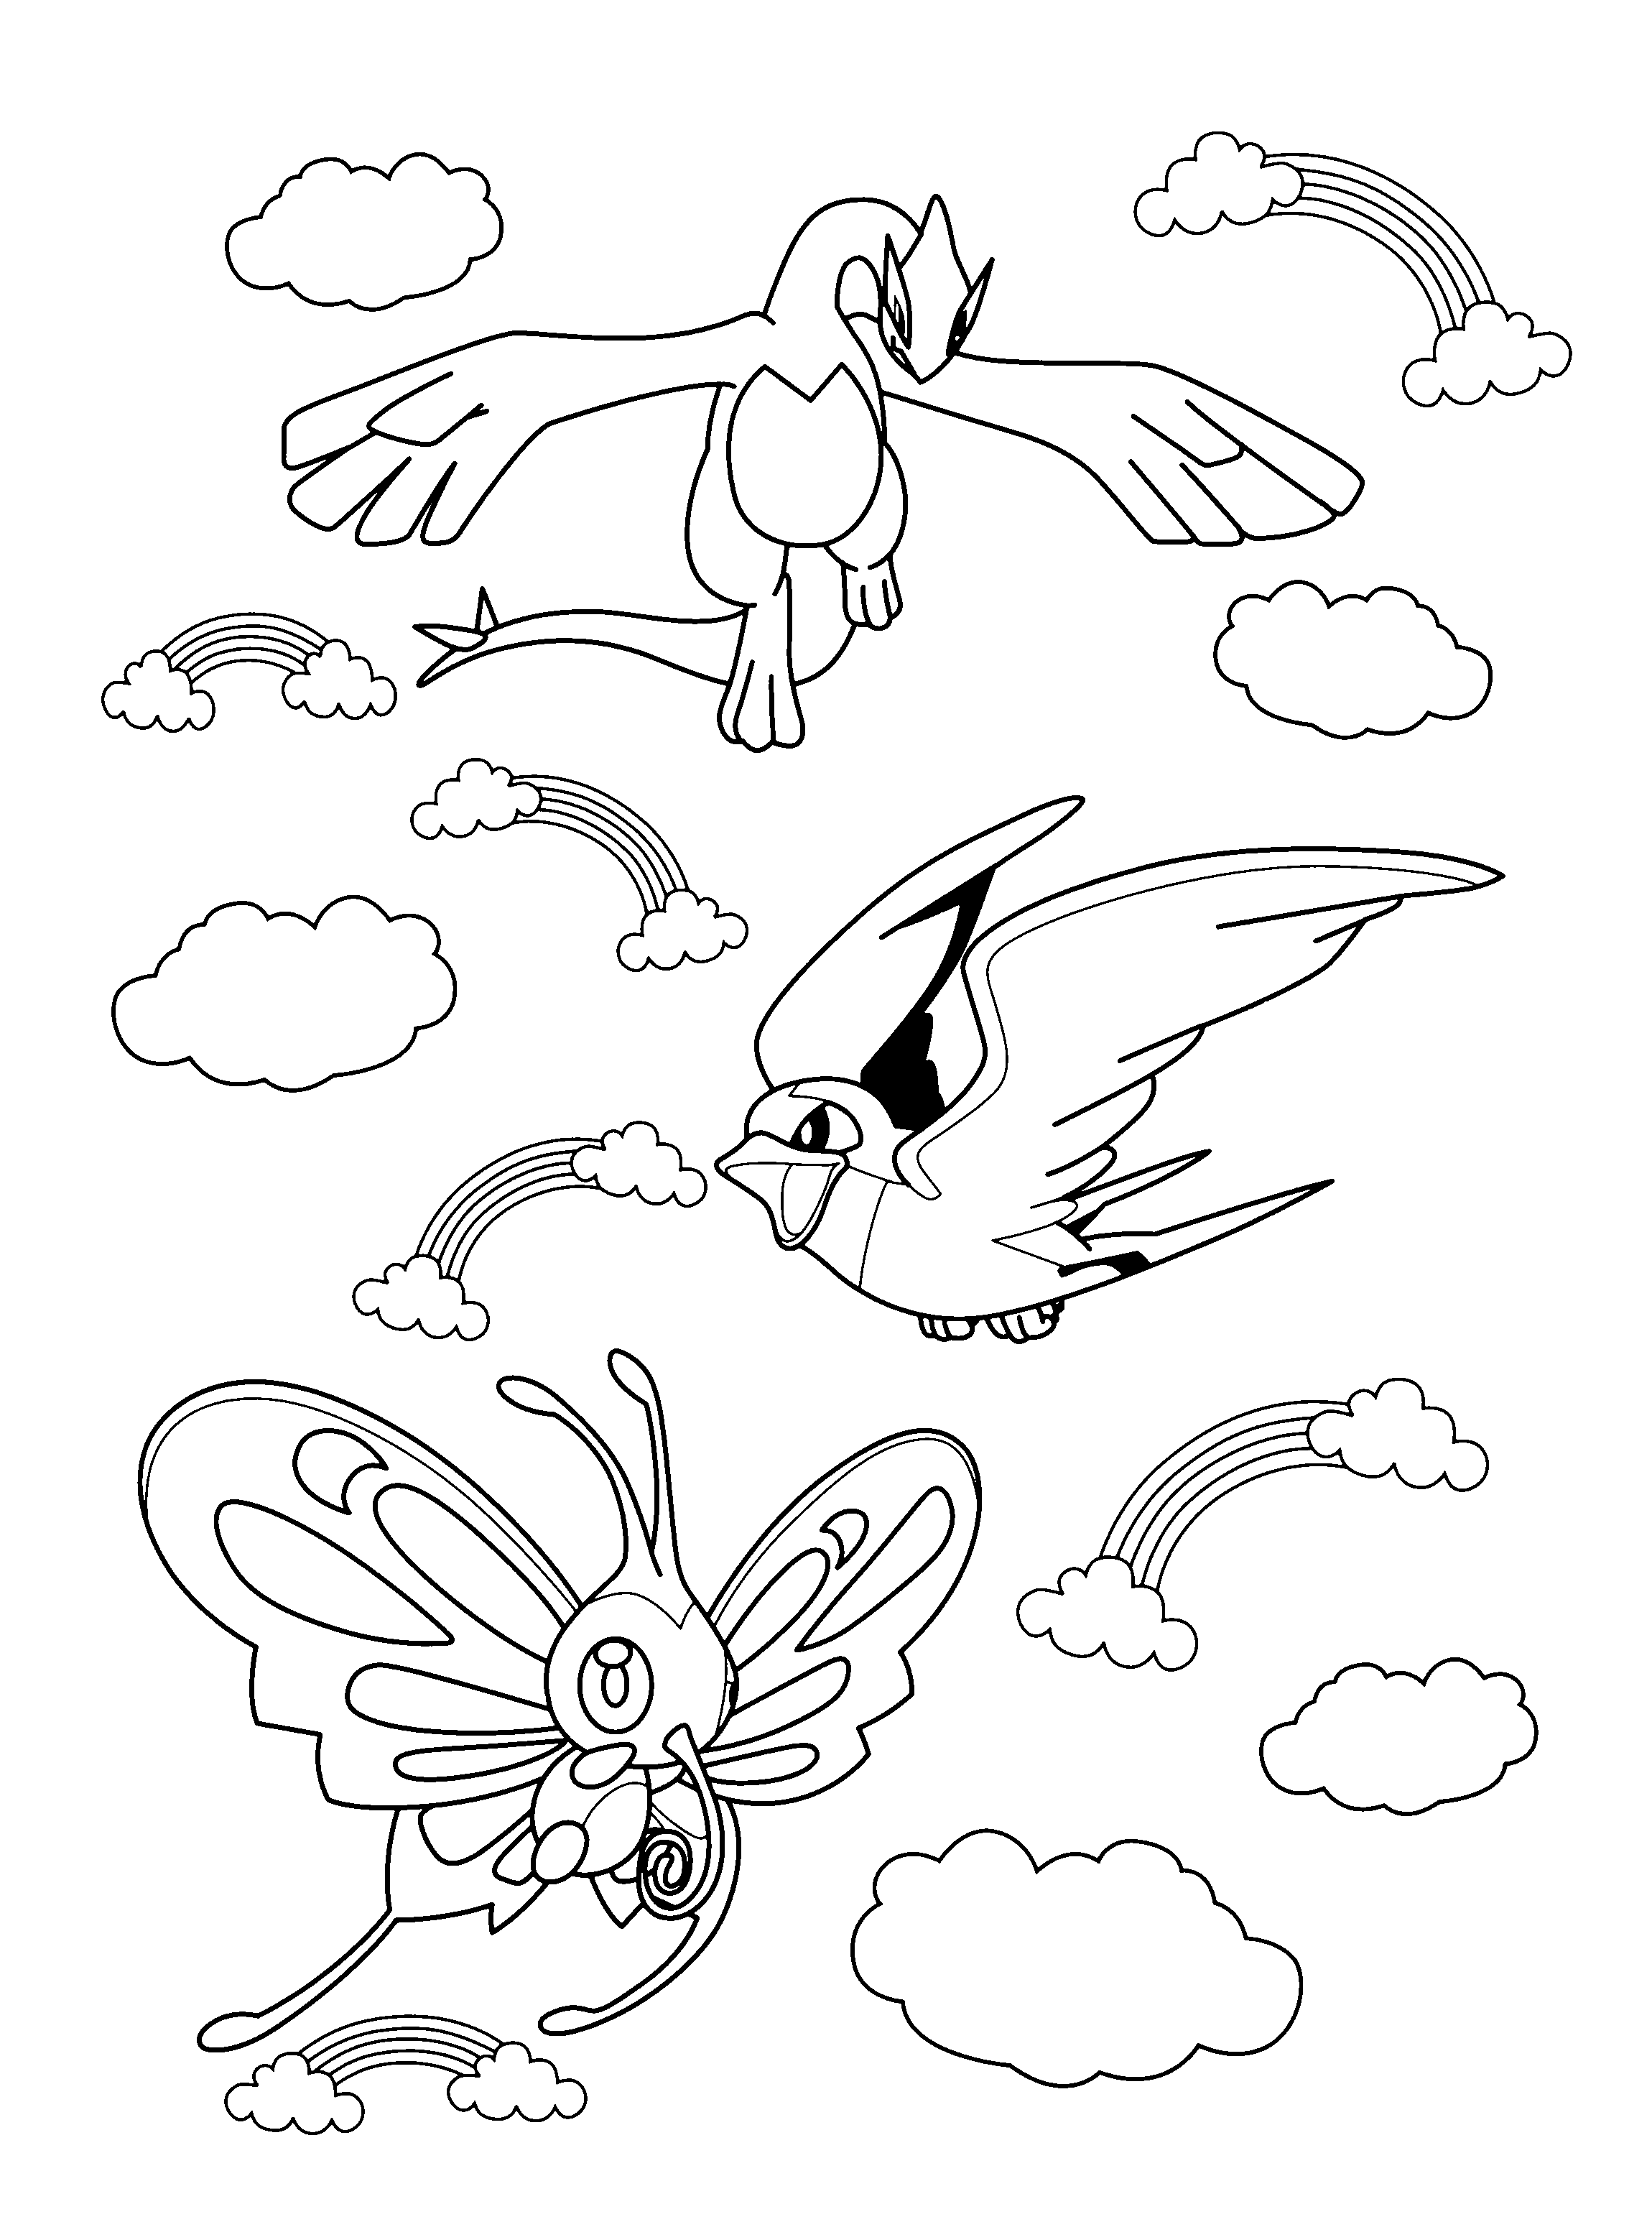 Download Coloring Page - Pokemon diamond pearl coloring pages 151